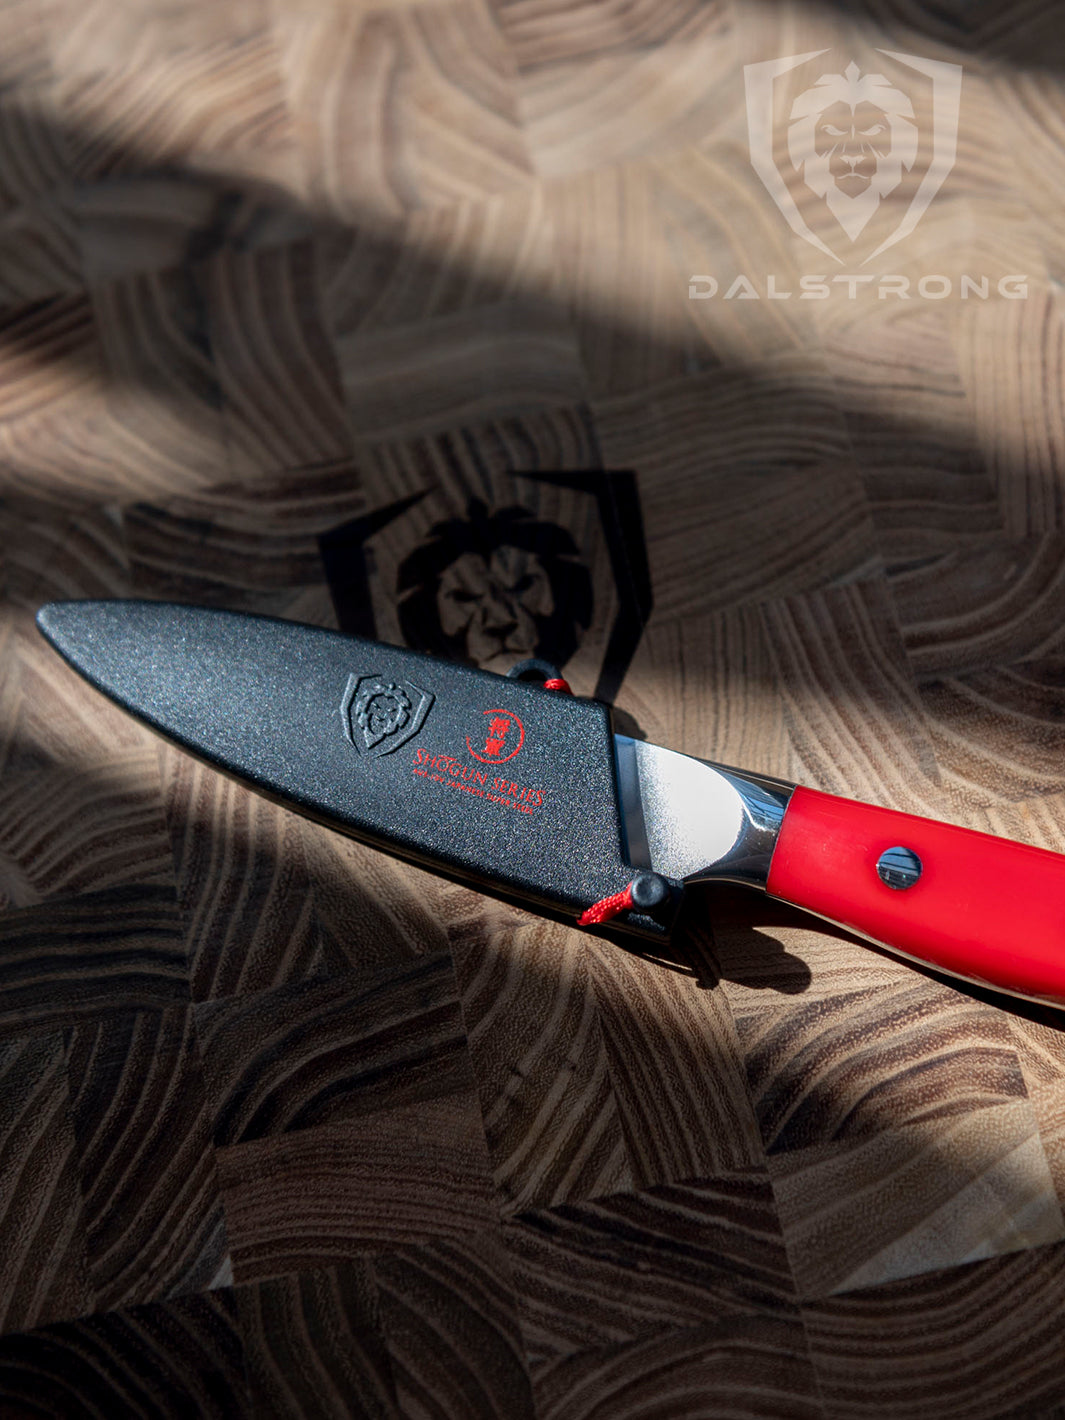 Dalstrong shogun series 3.5 inch paring knife with crimson red handle inside of it's black sheath on top of a dalstrong wooden board.